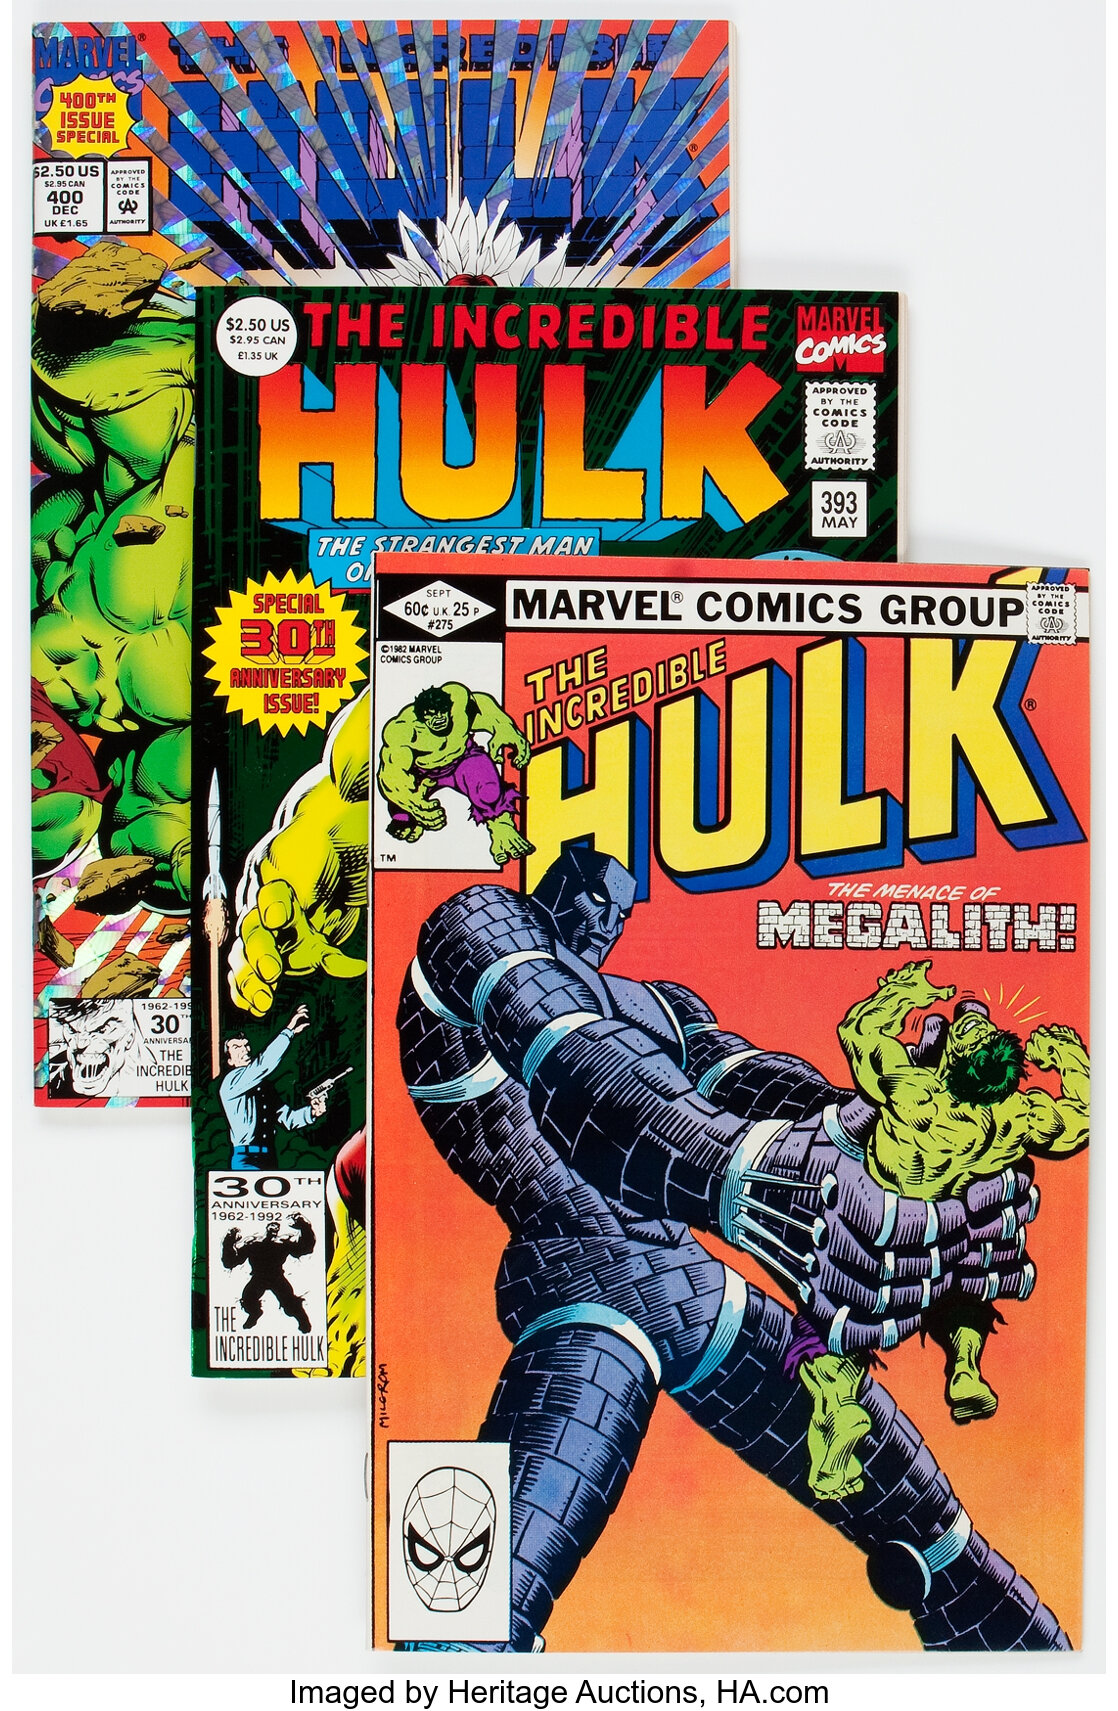 The Incredible Hulk 275 400 Box Lot Marvel 0 Condition Average Lot Heritage Auctions